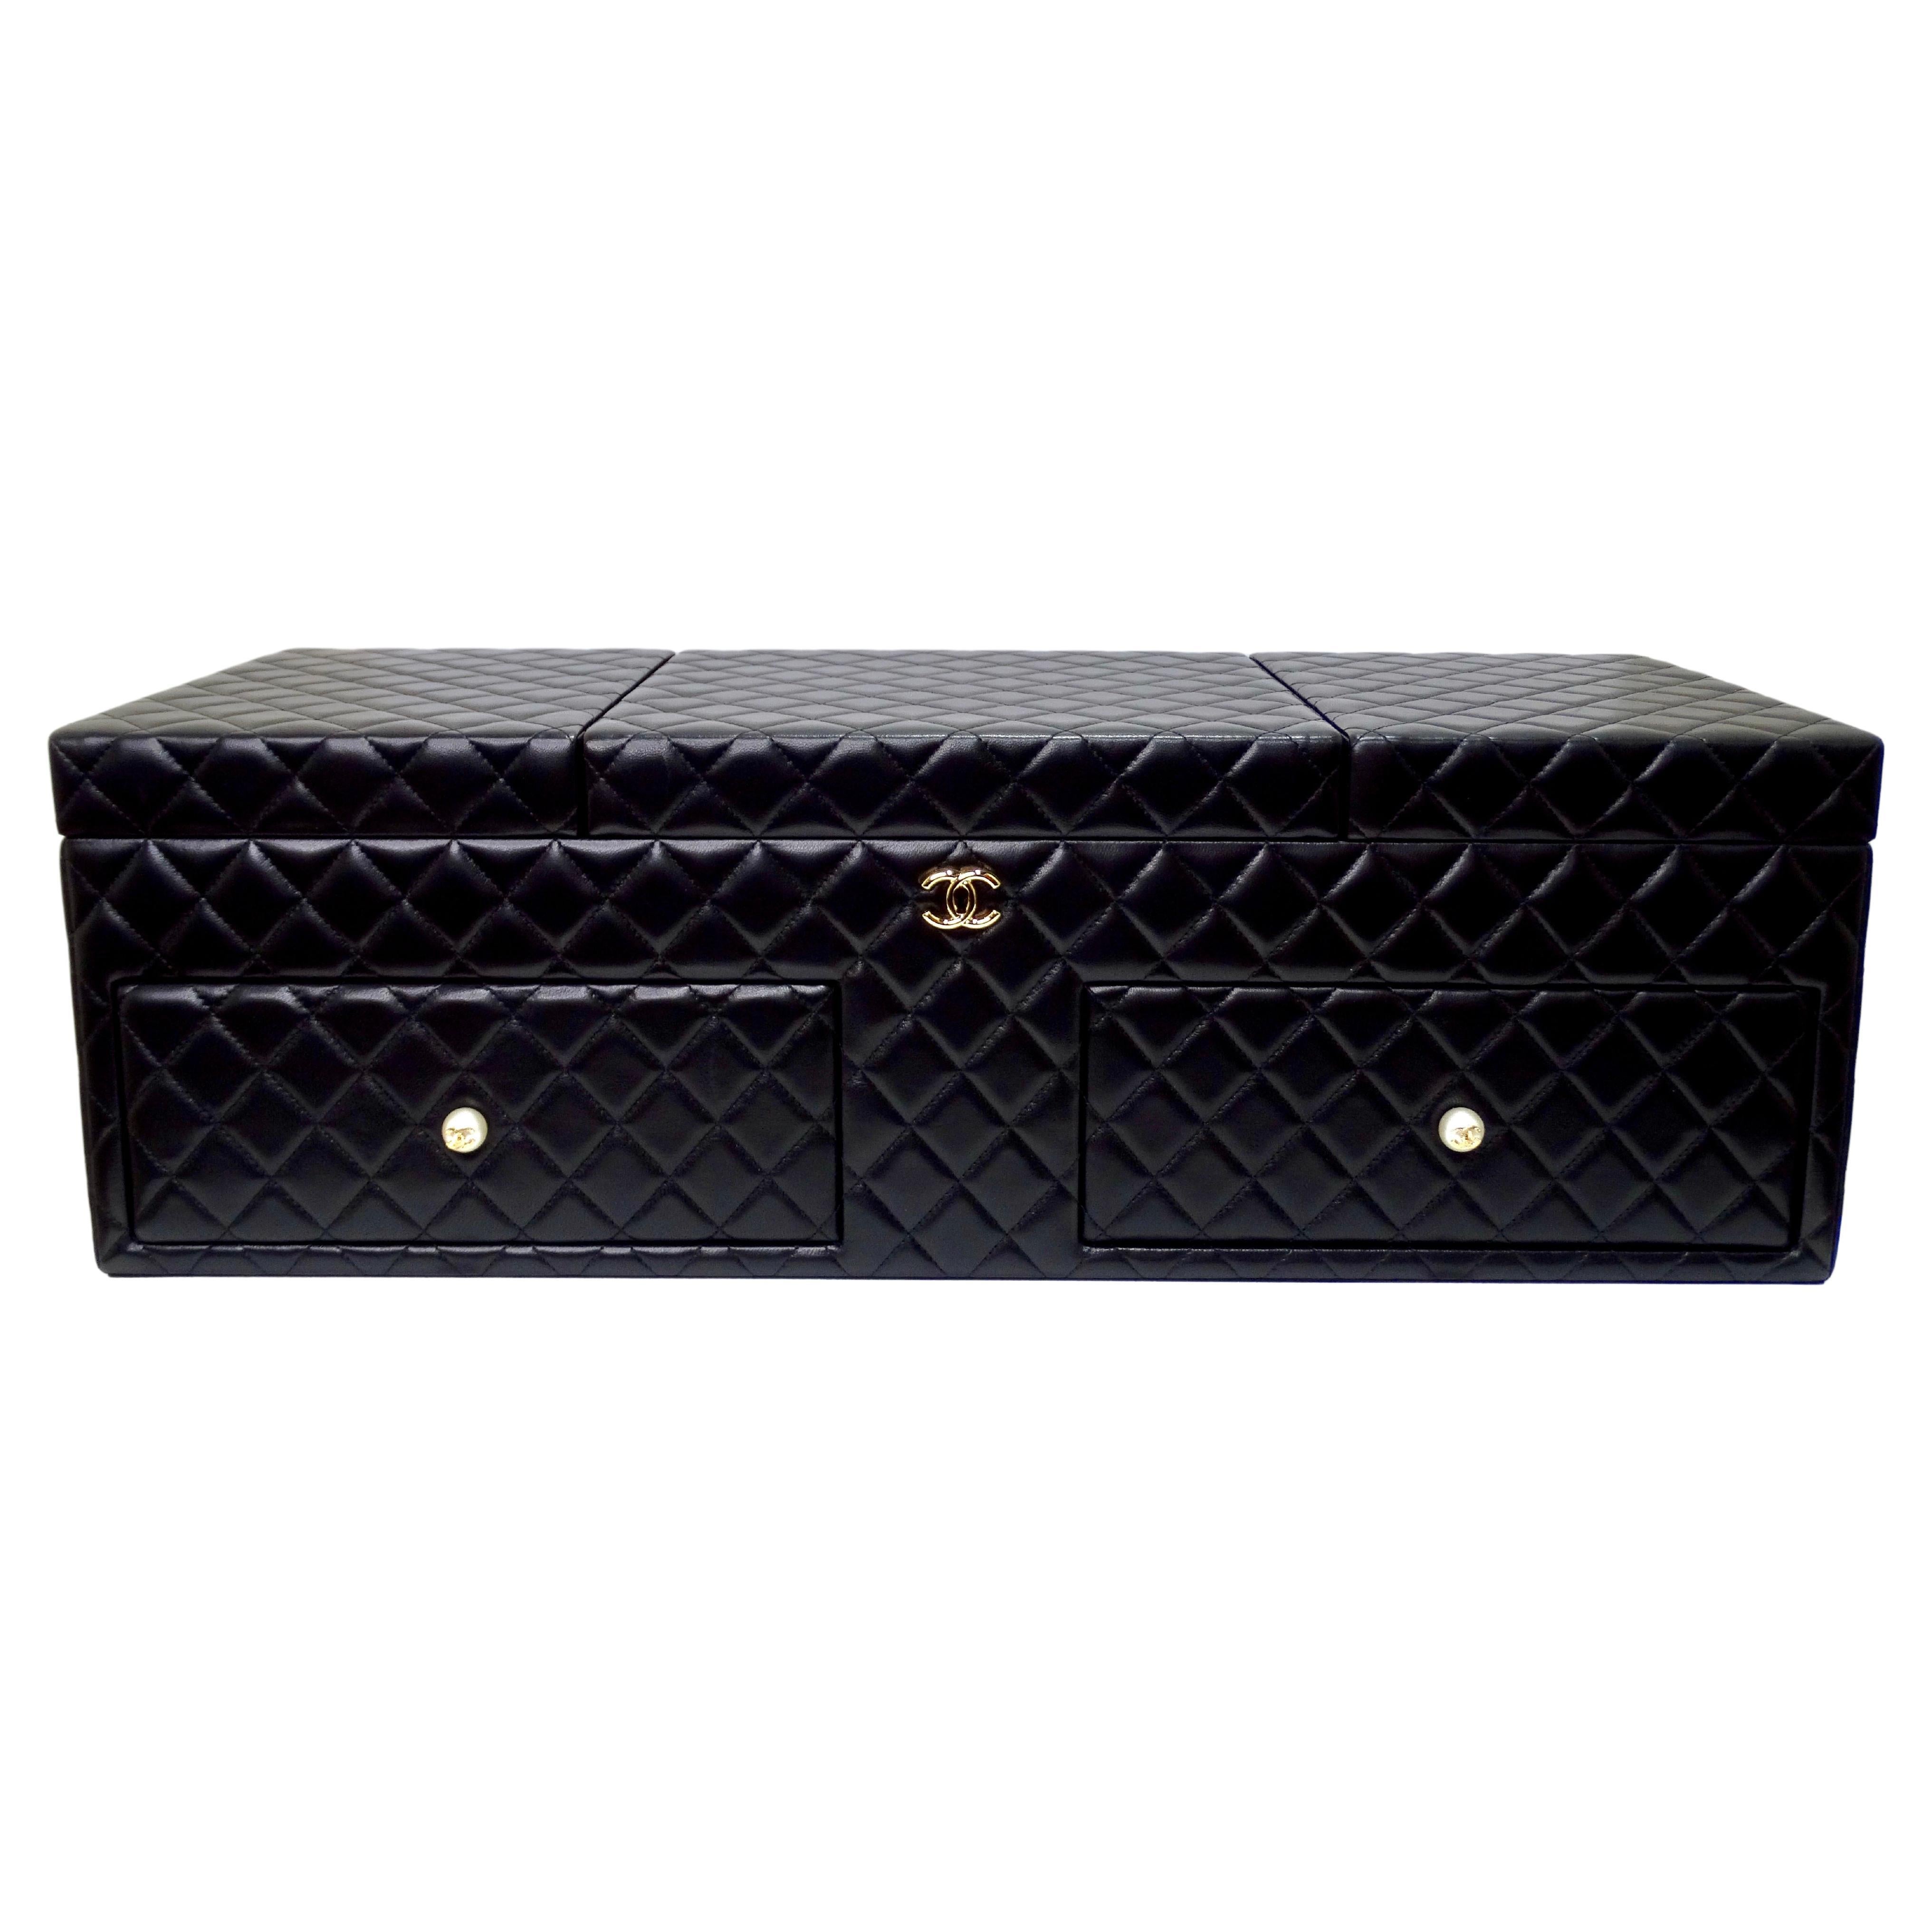 The most coveted Chanel piece you could get your hands on! Get ready in the best way with this huge Chanel jewelry box made of the best materials. This incredible piece of artwork is from a 2010 collection and is meant to hold your jewelry, makeup,